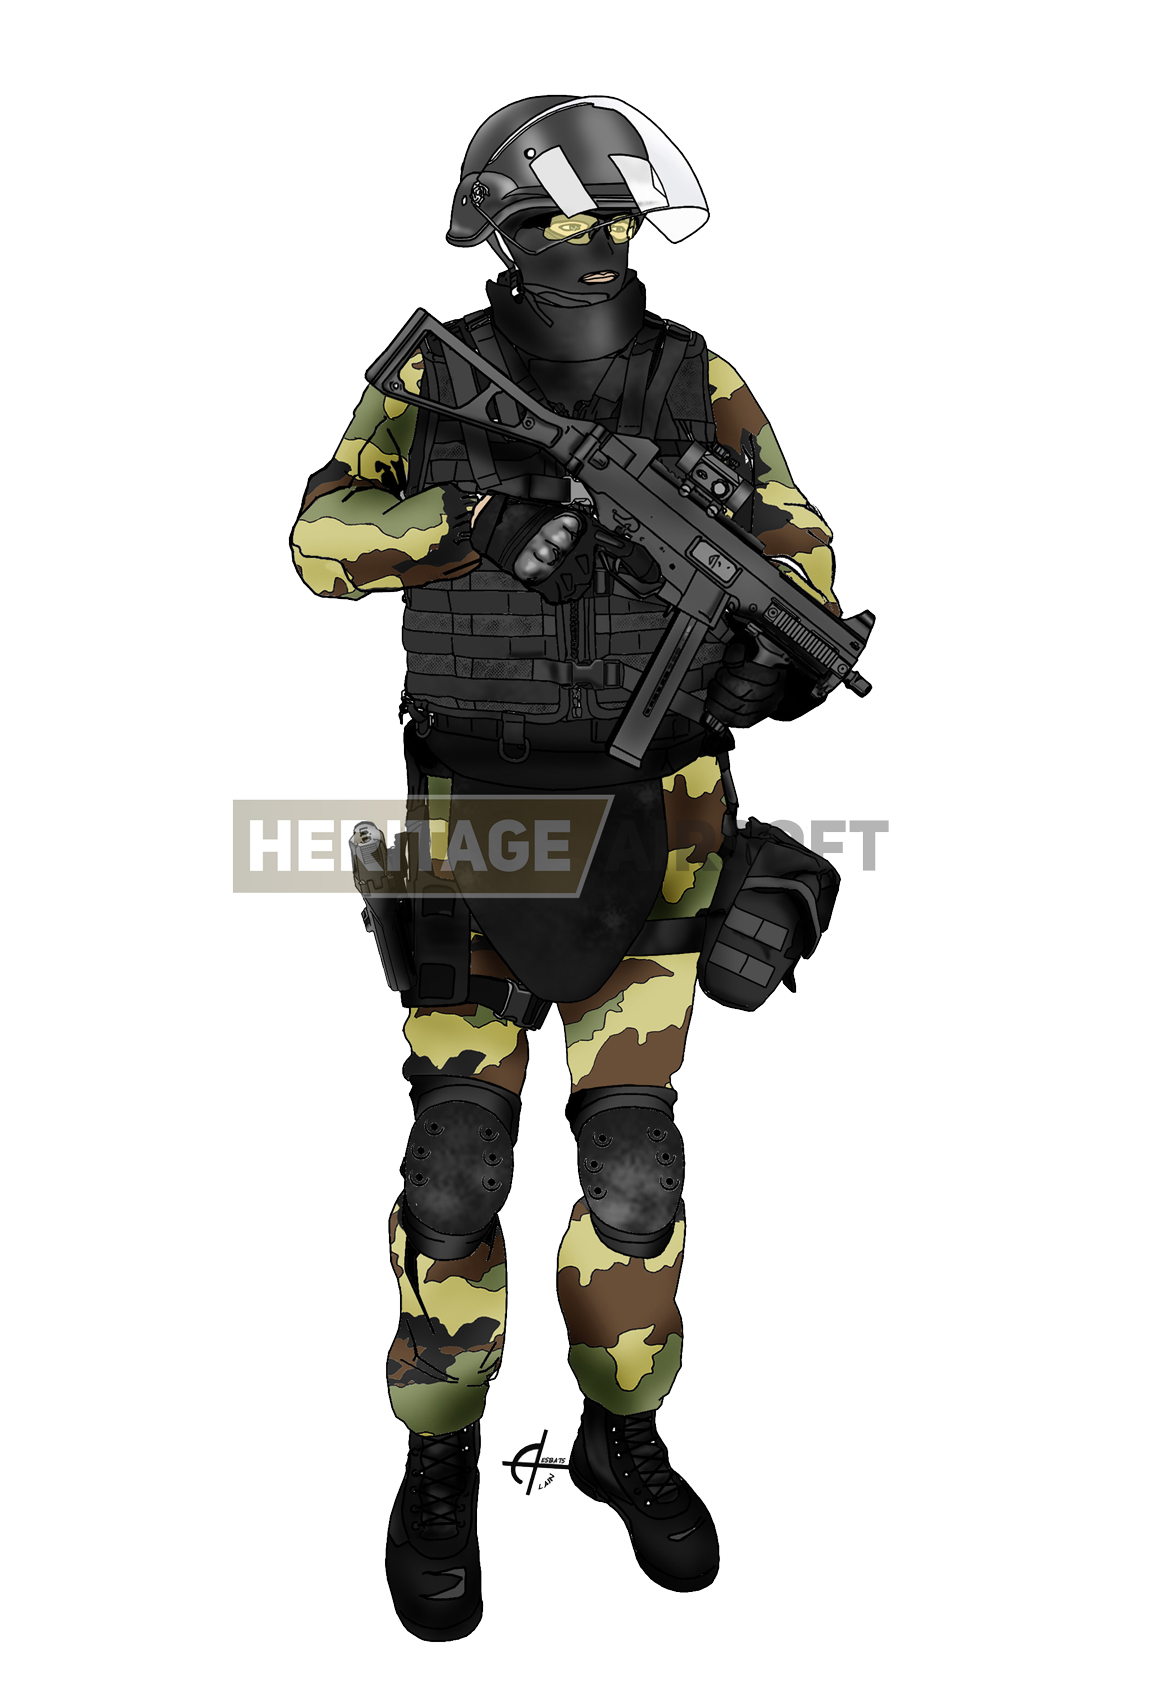 Tenue Airsoft : GIGN sites Seveso - Heritage Airsoft